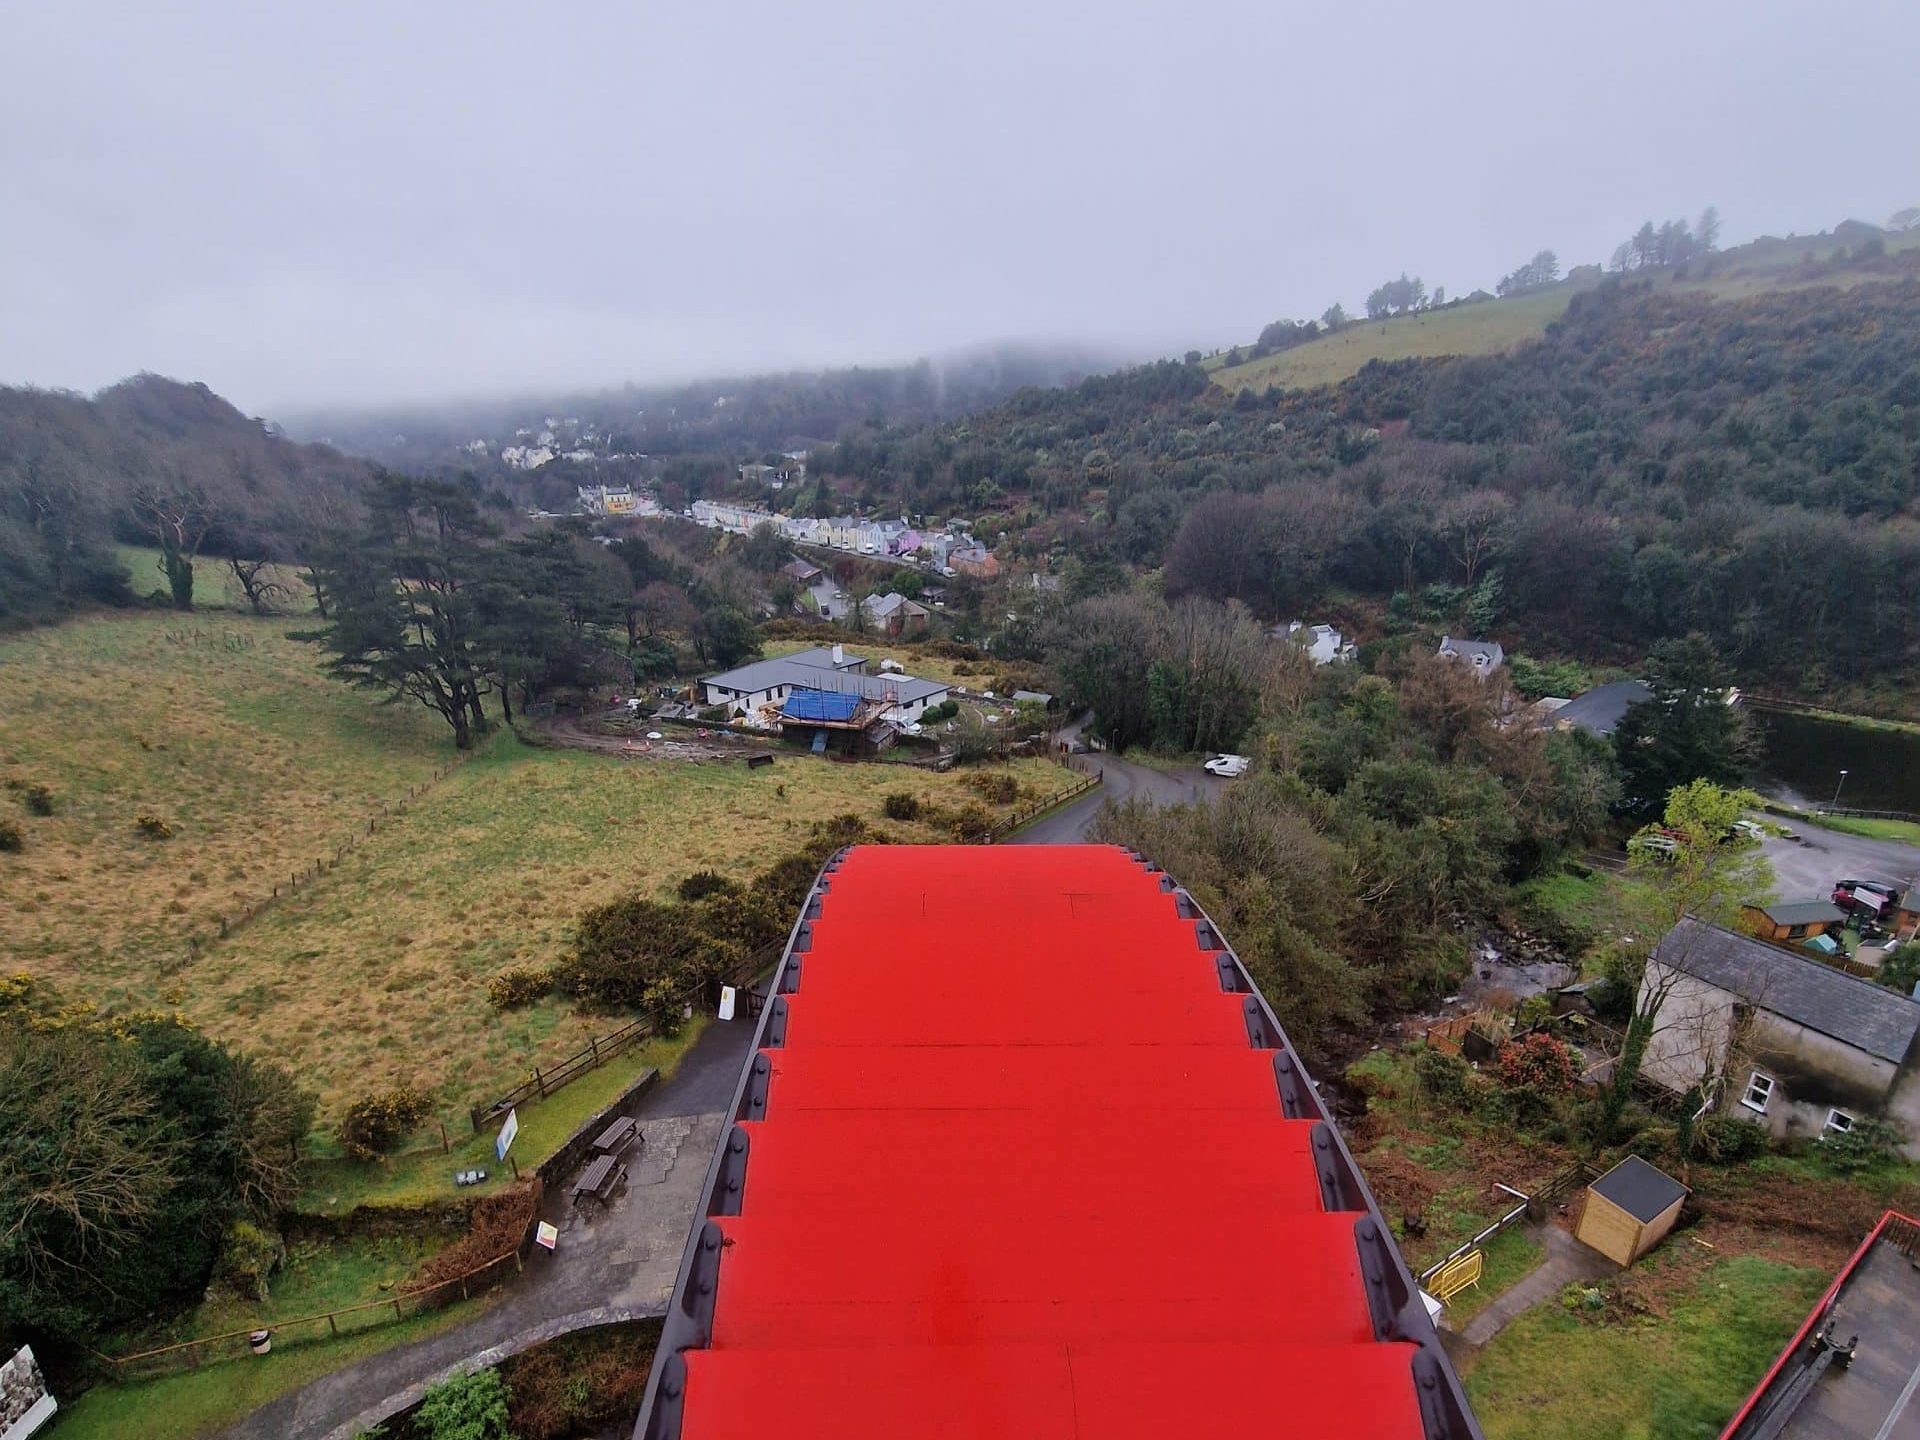 On top of the Laxey Wheel